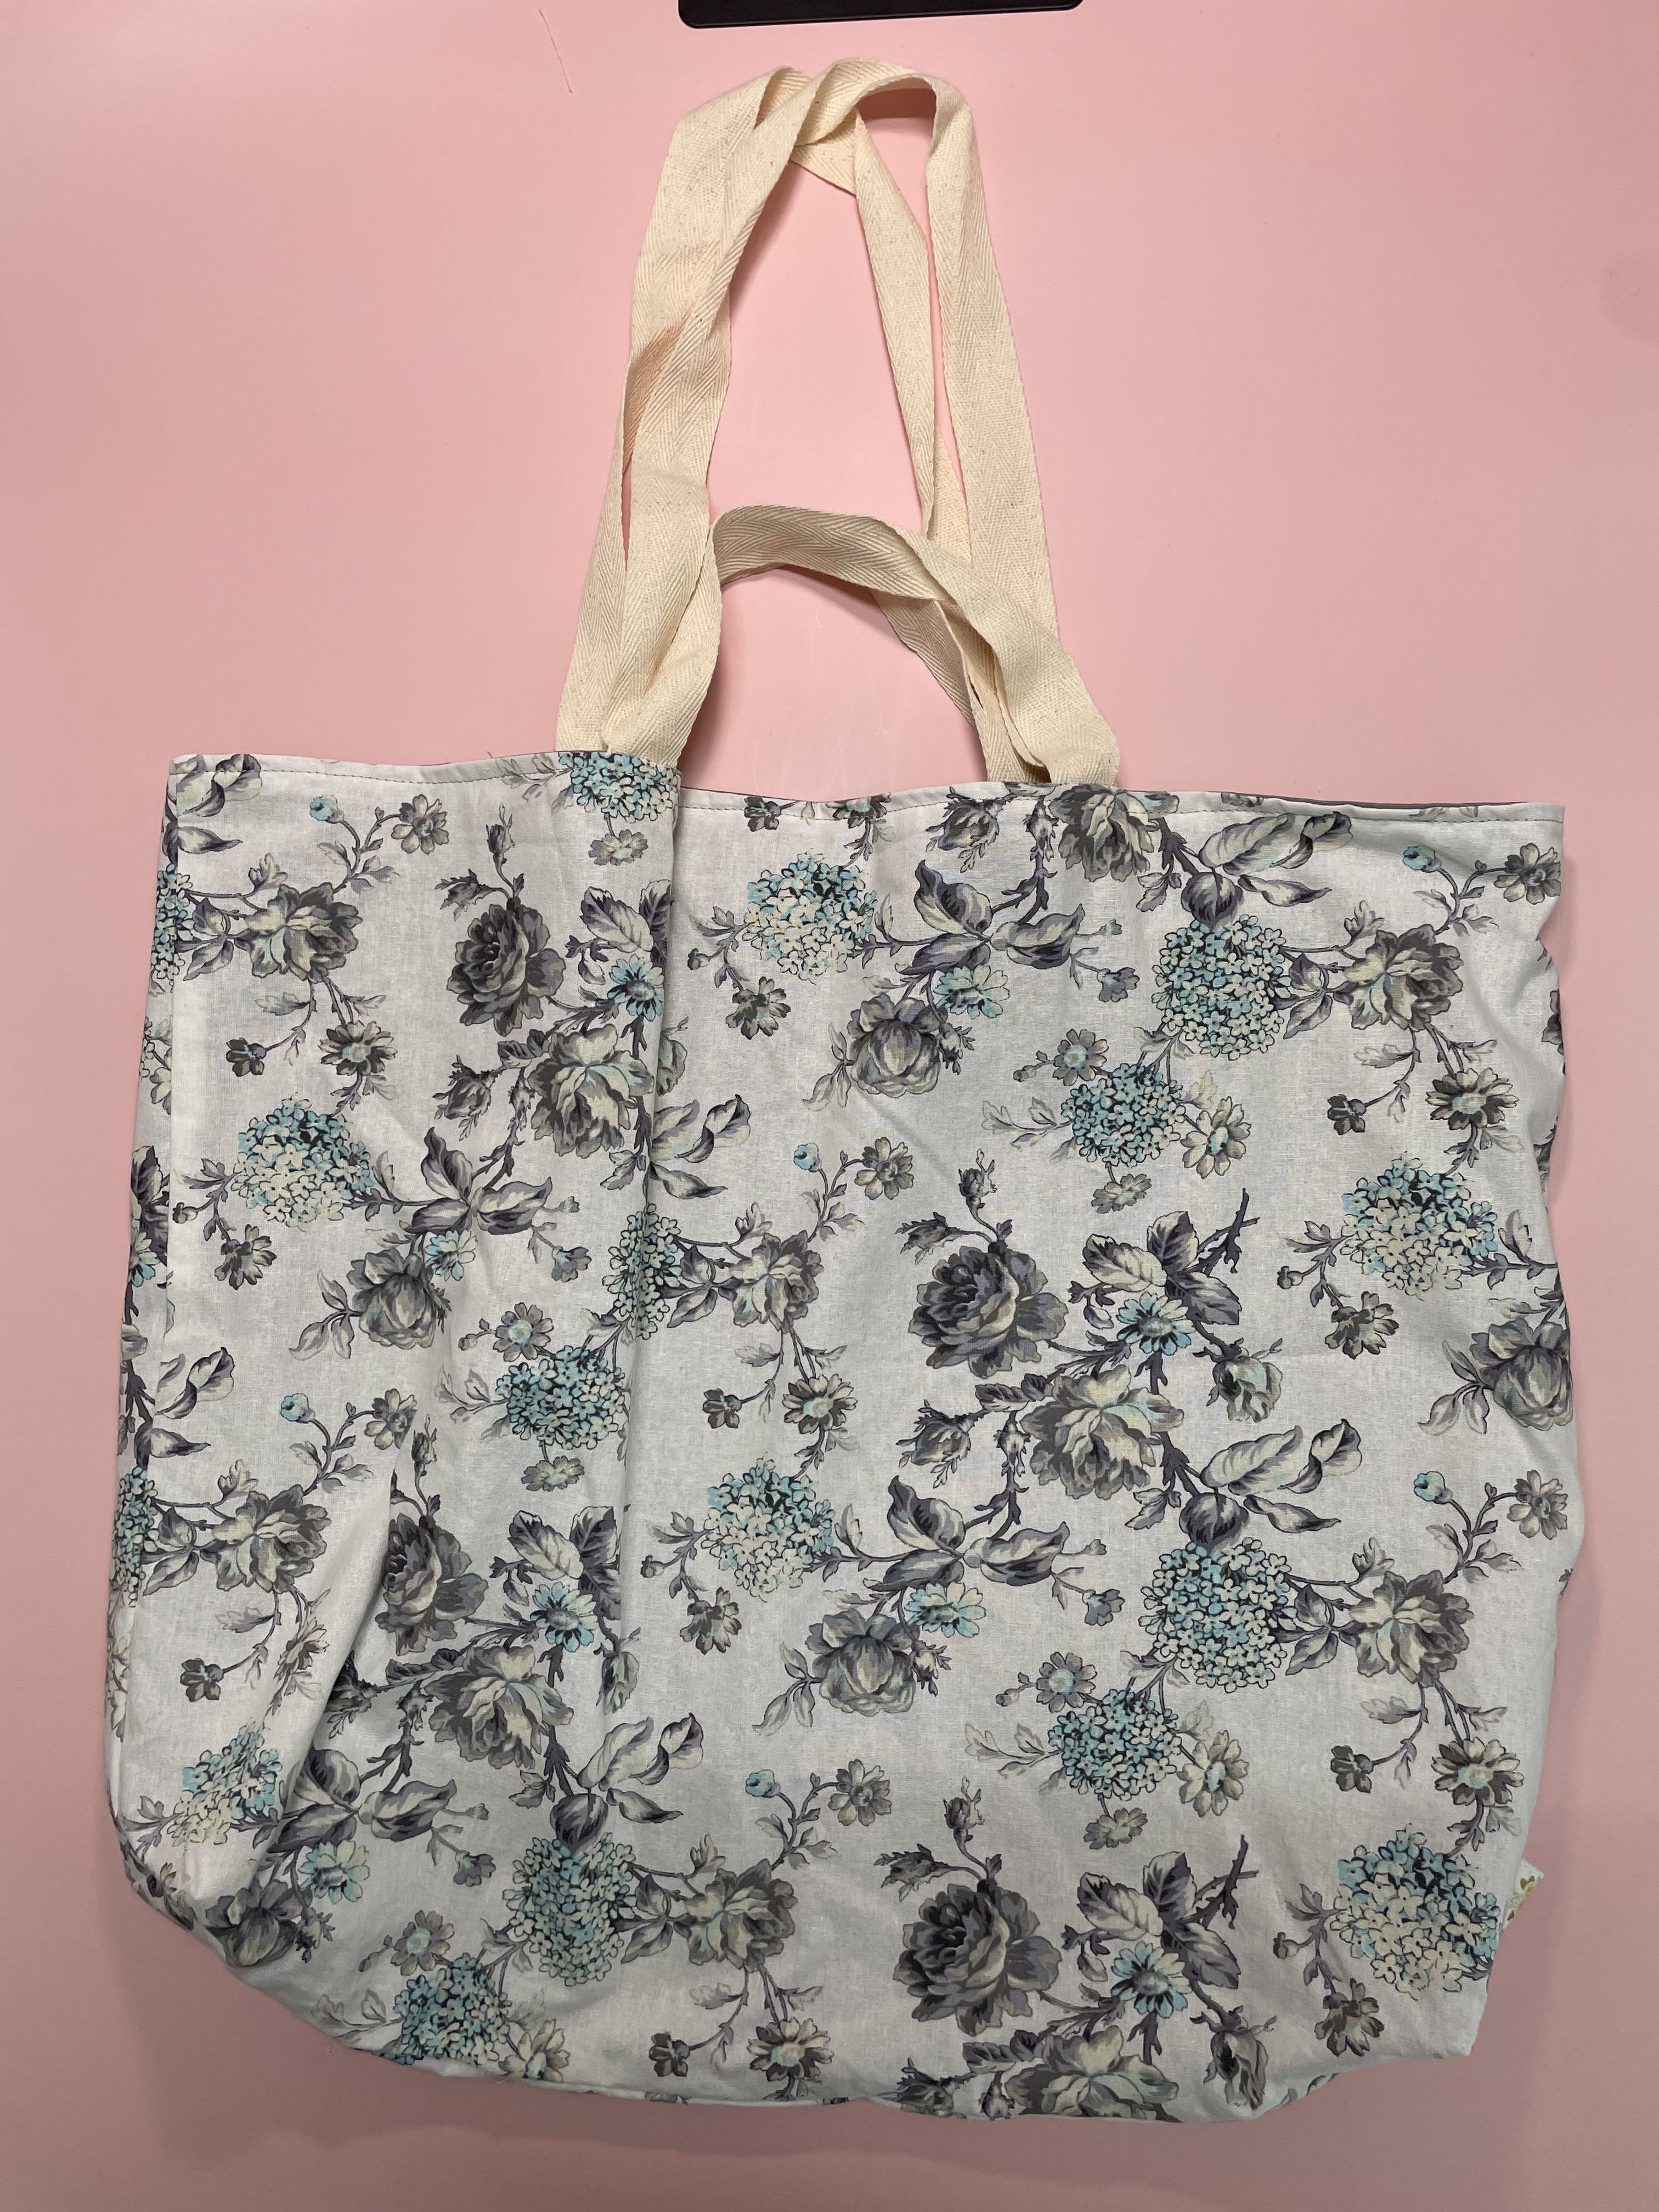 Carry It All Rubber Tote Bag - White Floral